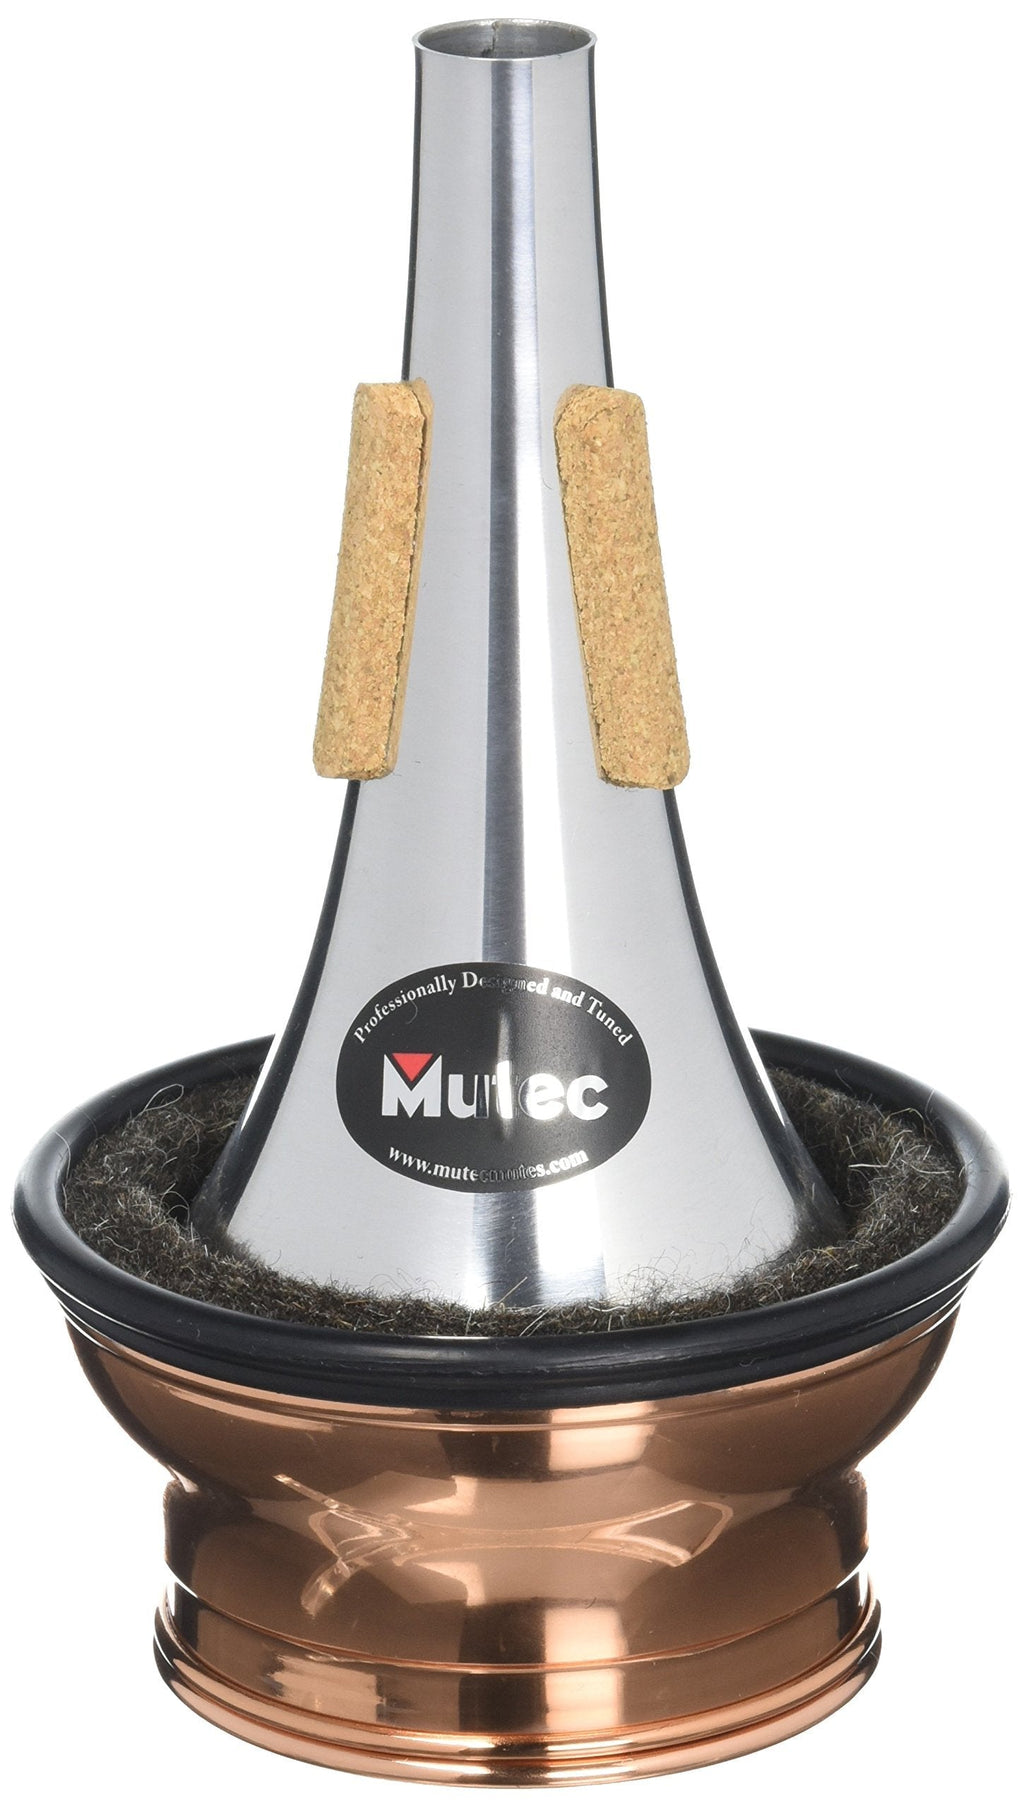 Mutec MHT146 Cup Mute for Trumpet - Copper Bottom